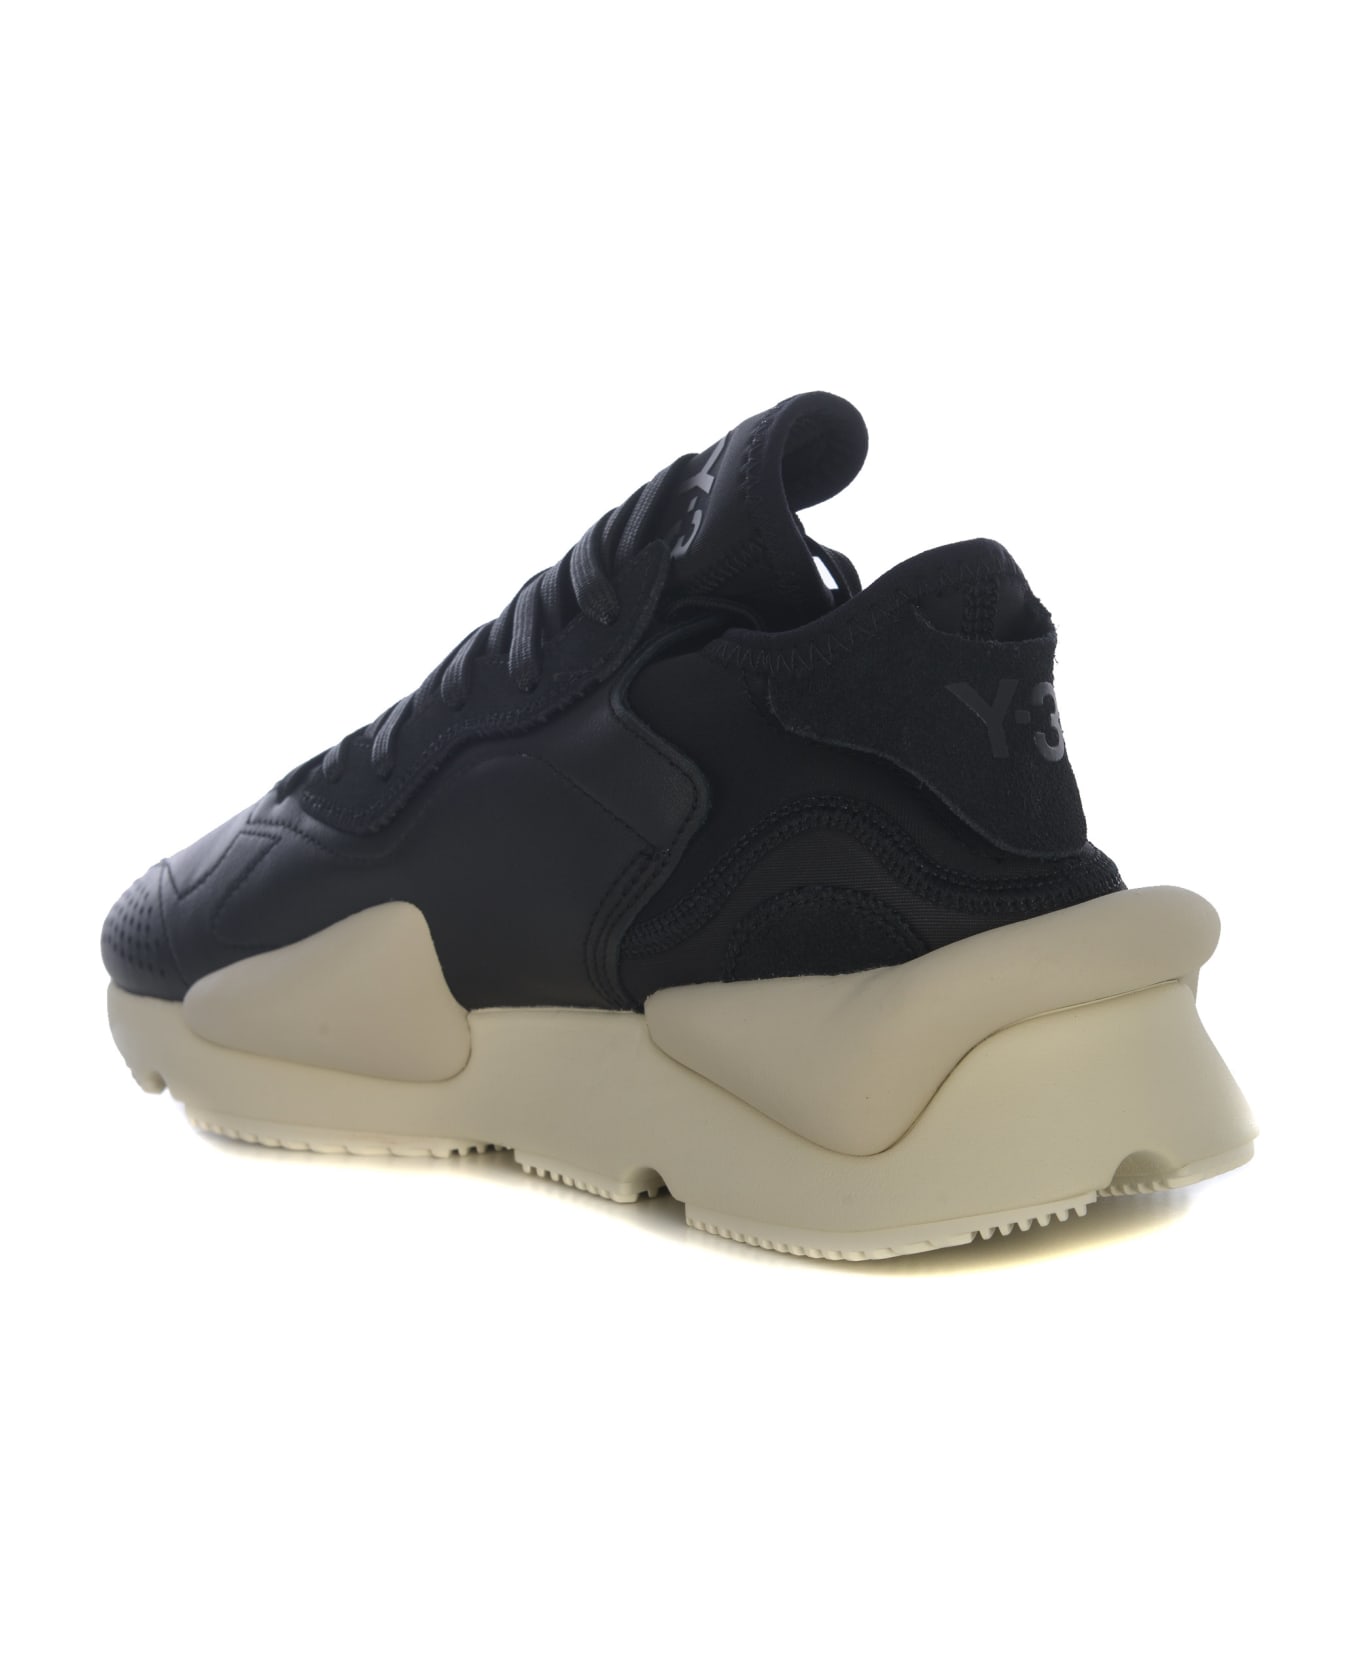 Y-3 Sneakers Y-3 "kaiwa" Made With Leather Upper - Nero